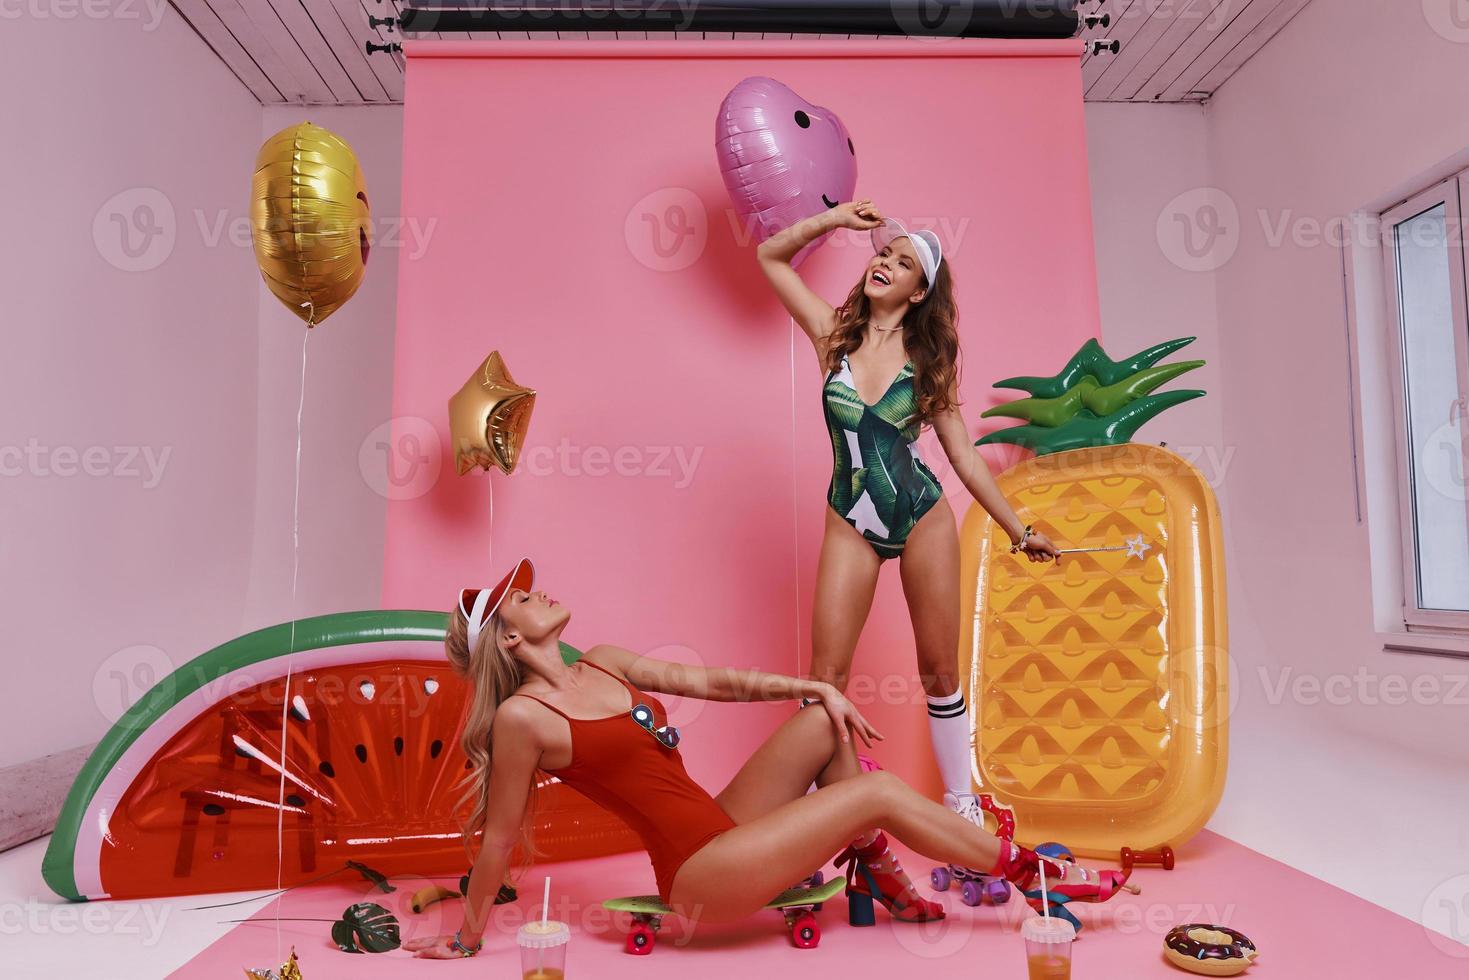 Feeling free and happy. Playful young women in swimwear going crazy while posing against pink background photo